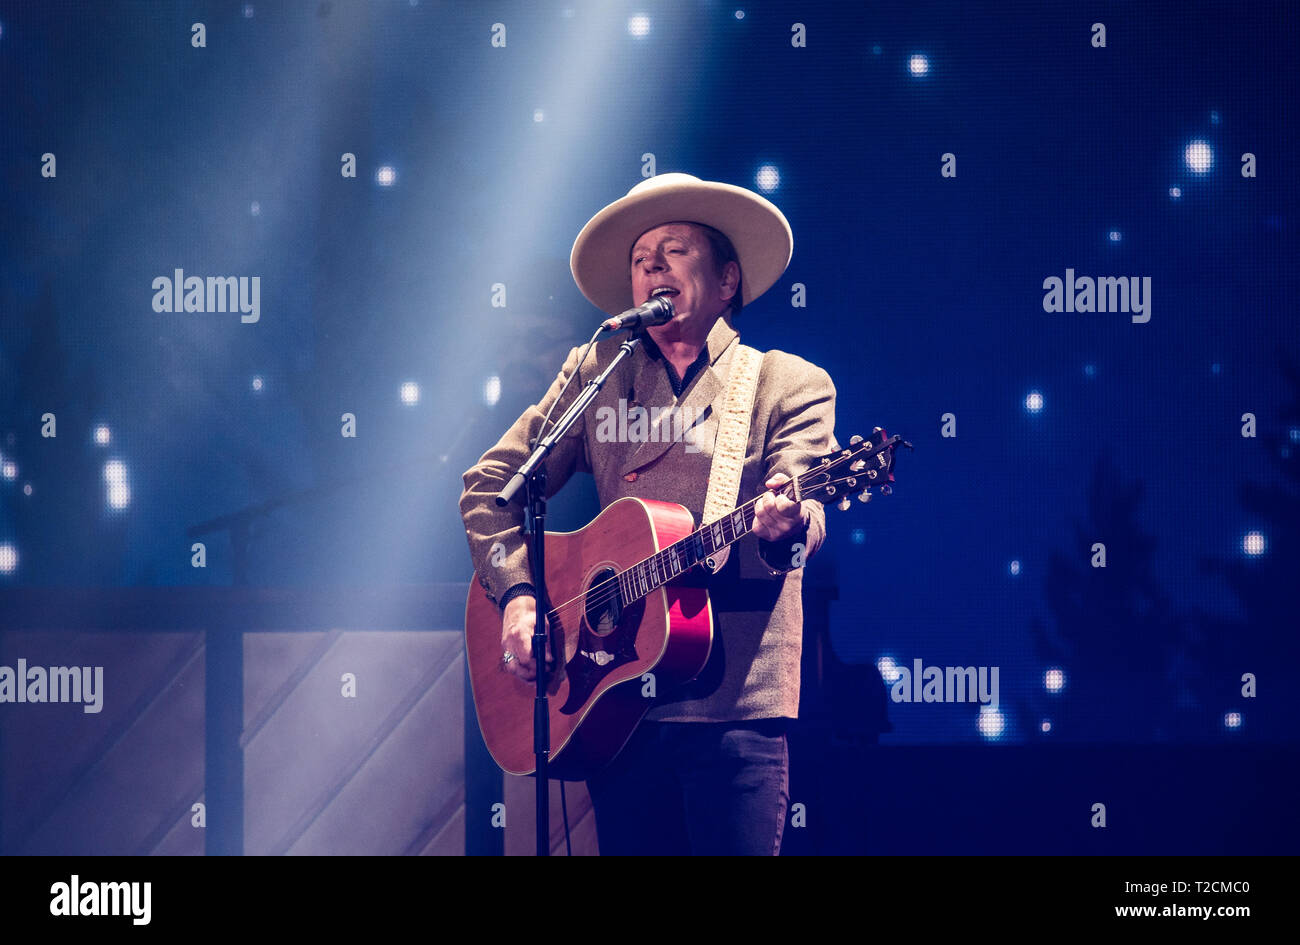 Frankfurt, Germany. 1st Apr 2019. Kiefer Sutherland, actor and singer, performs on stage. The Live Entertainment Award (LEA) is presented to concert and show organisers, managers, agents and venue operators from German-speaking countries. Photo: Andreas Arnold/dpa Credit: dpa picture alliance/Alamy Live News Stock Photo